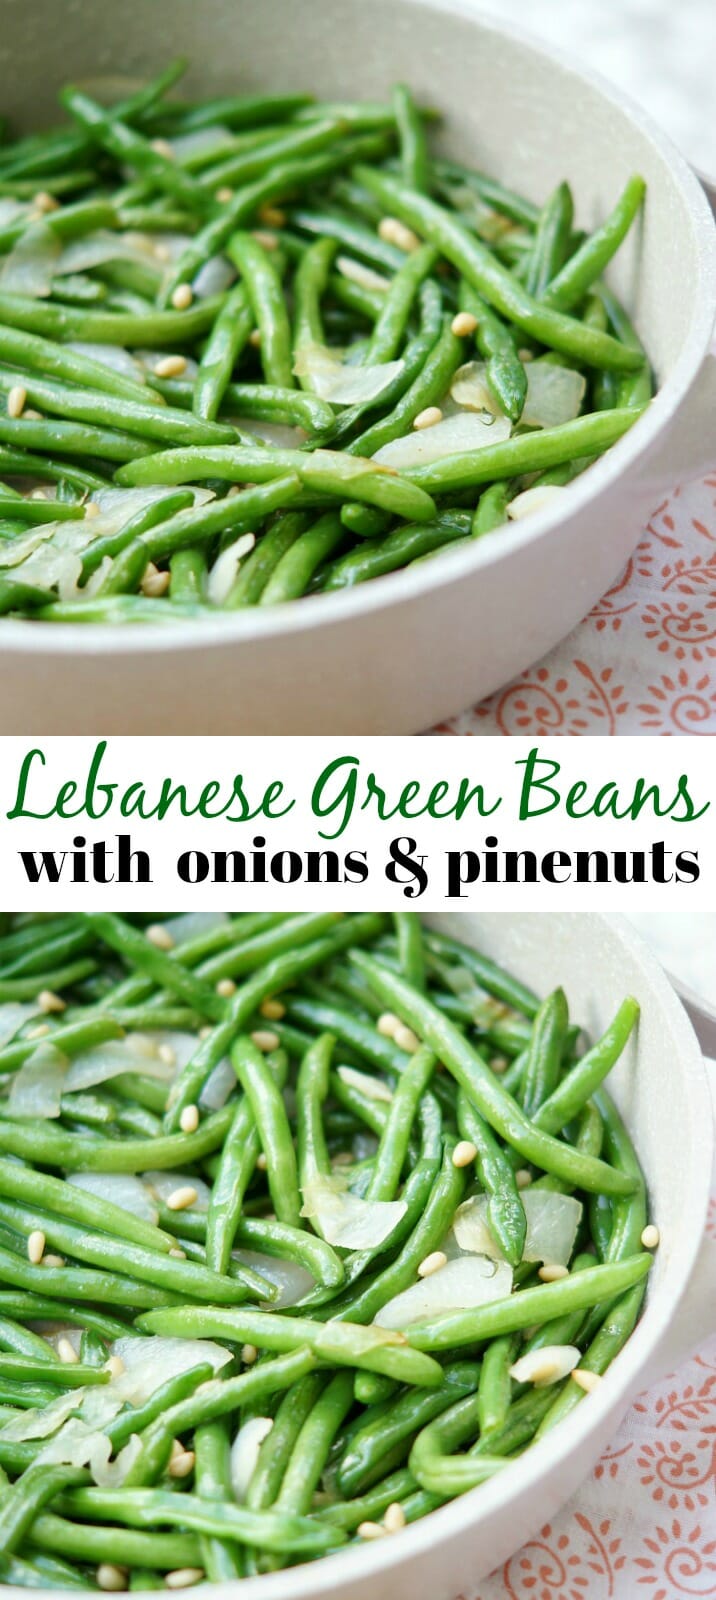 Lebanese Green Beans with Onions, Pine Nuts, and Olive Oil